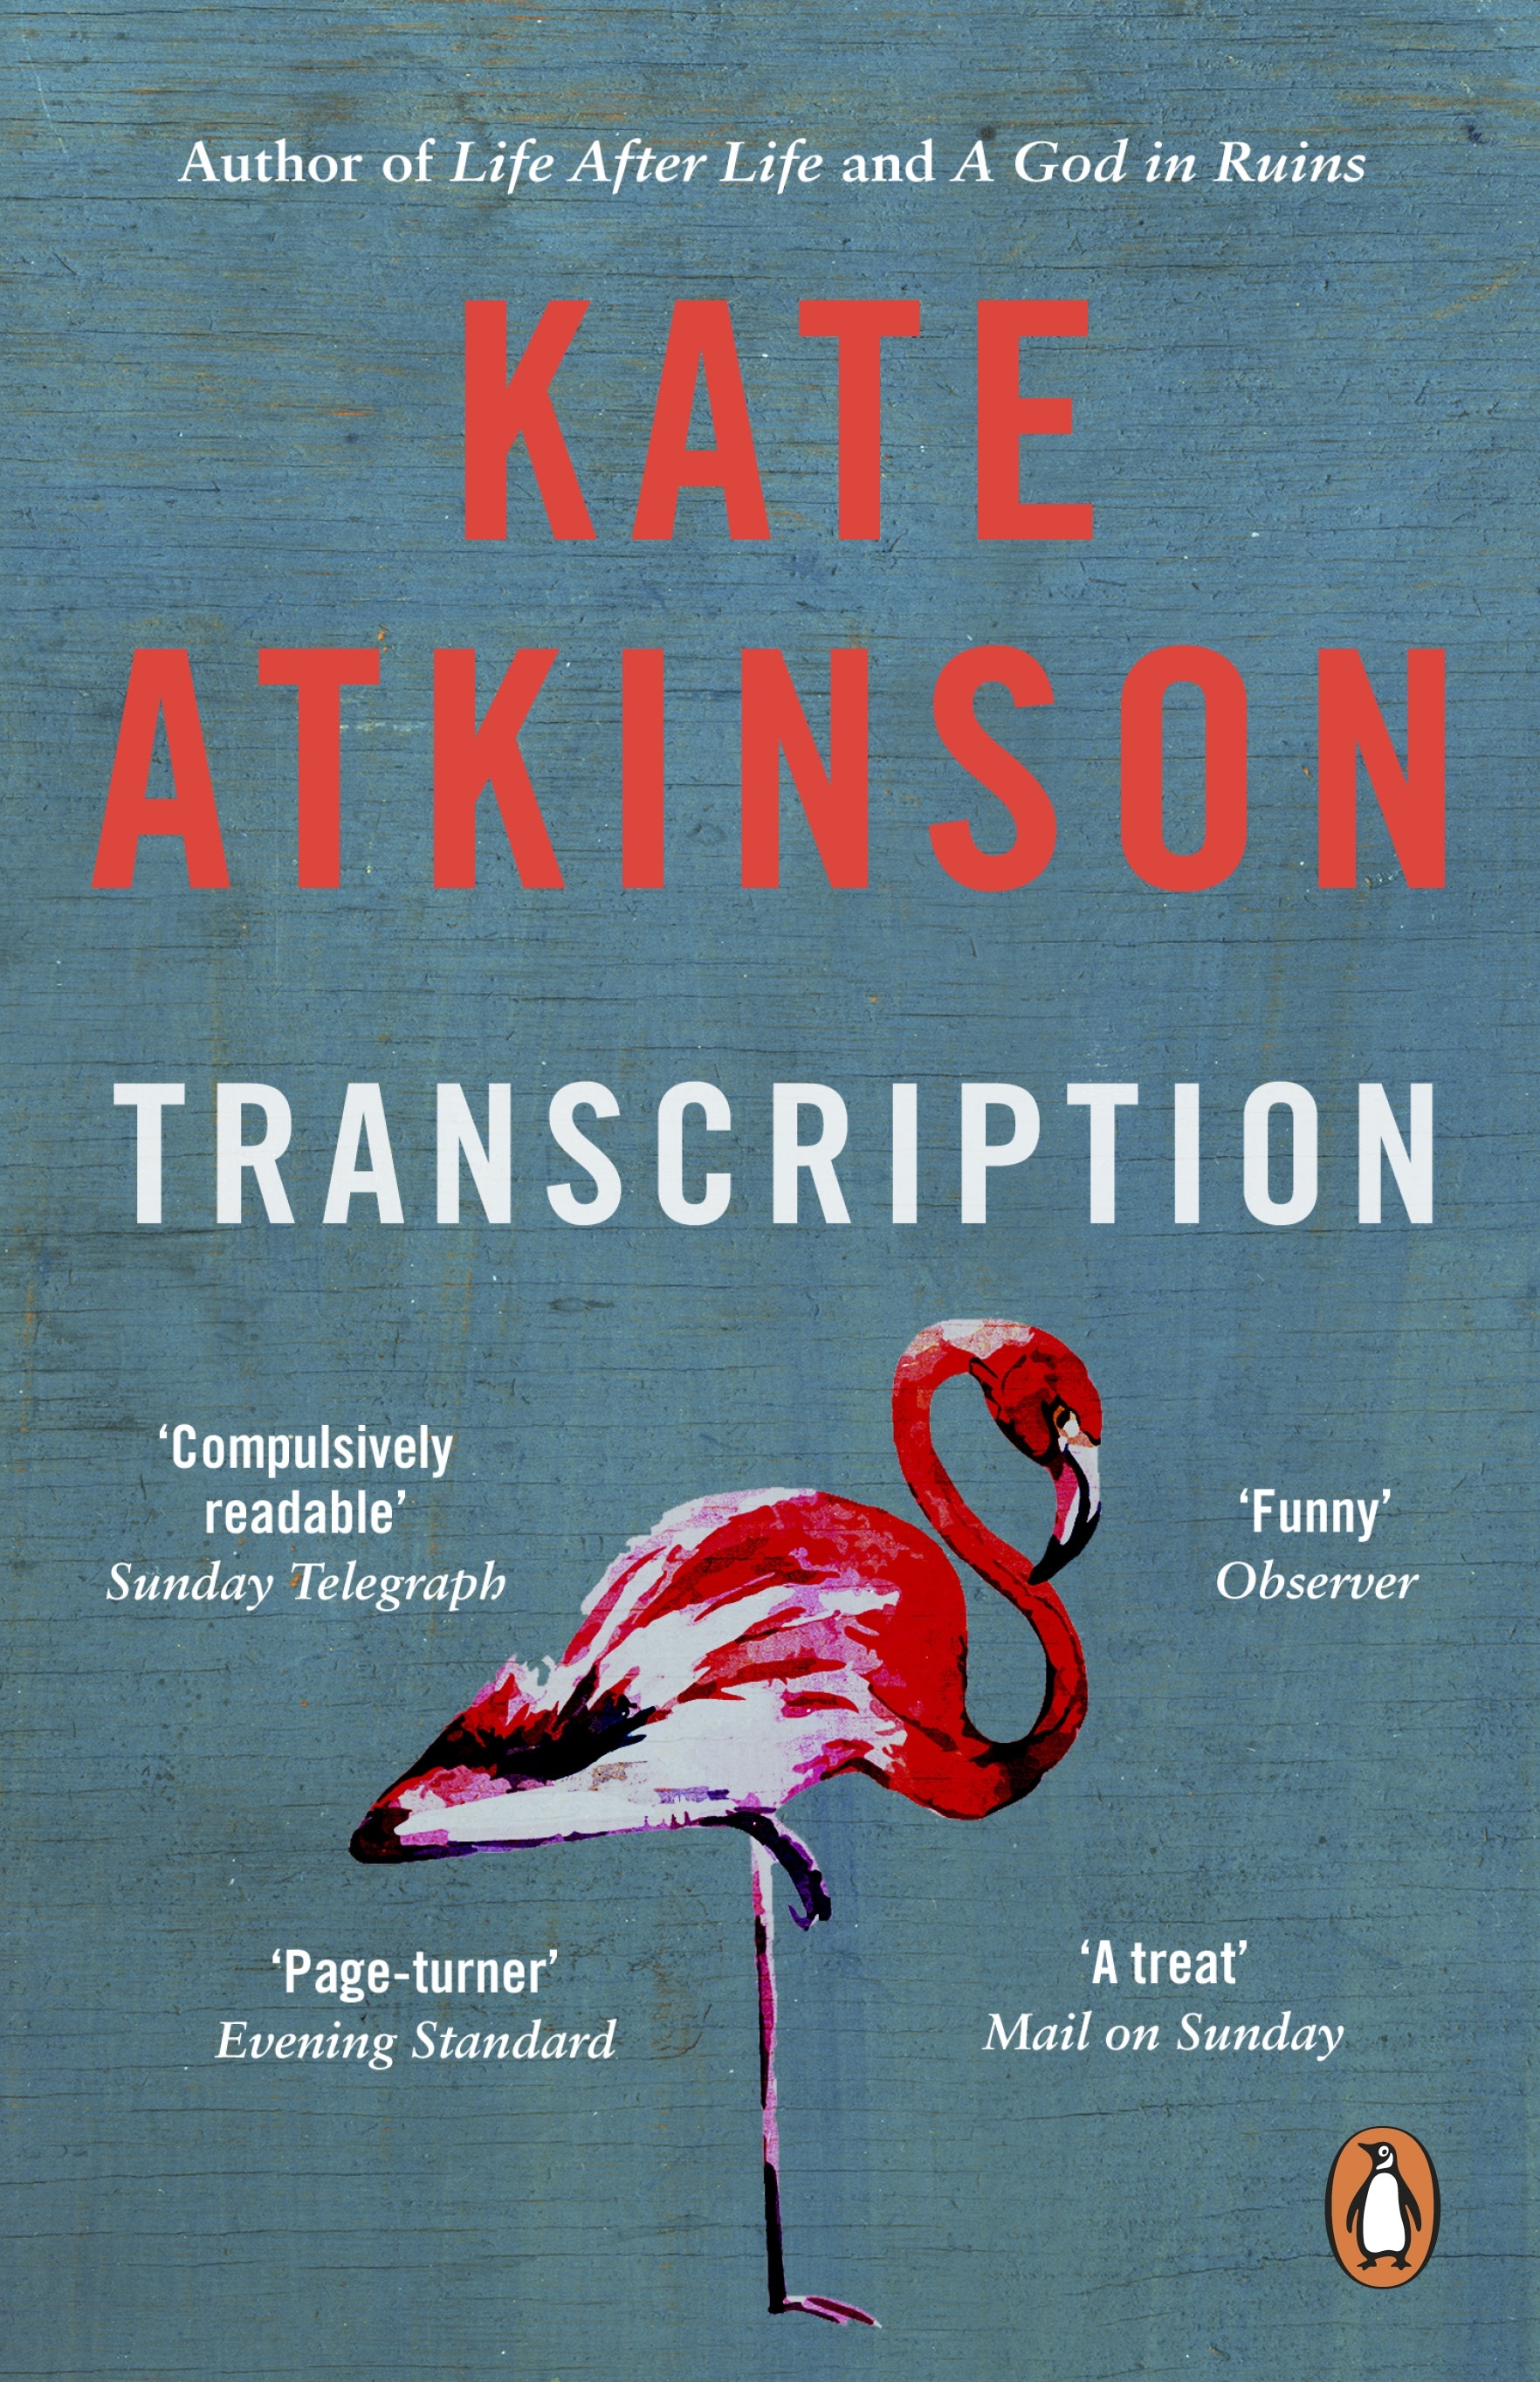 Book “Transcription” by Kate Atkinson — March 21, 2019